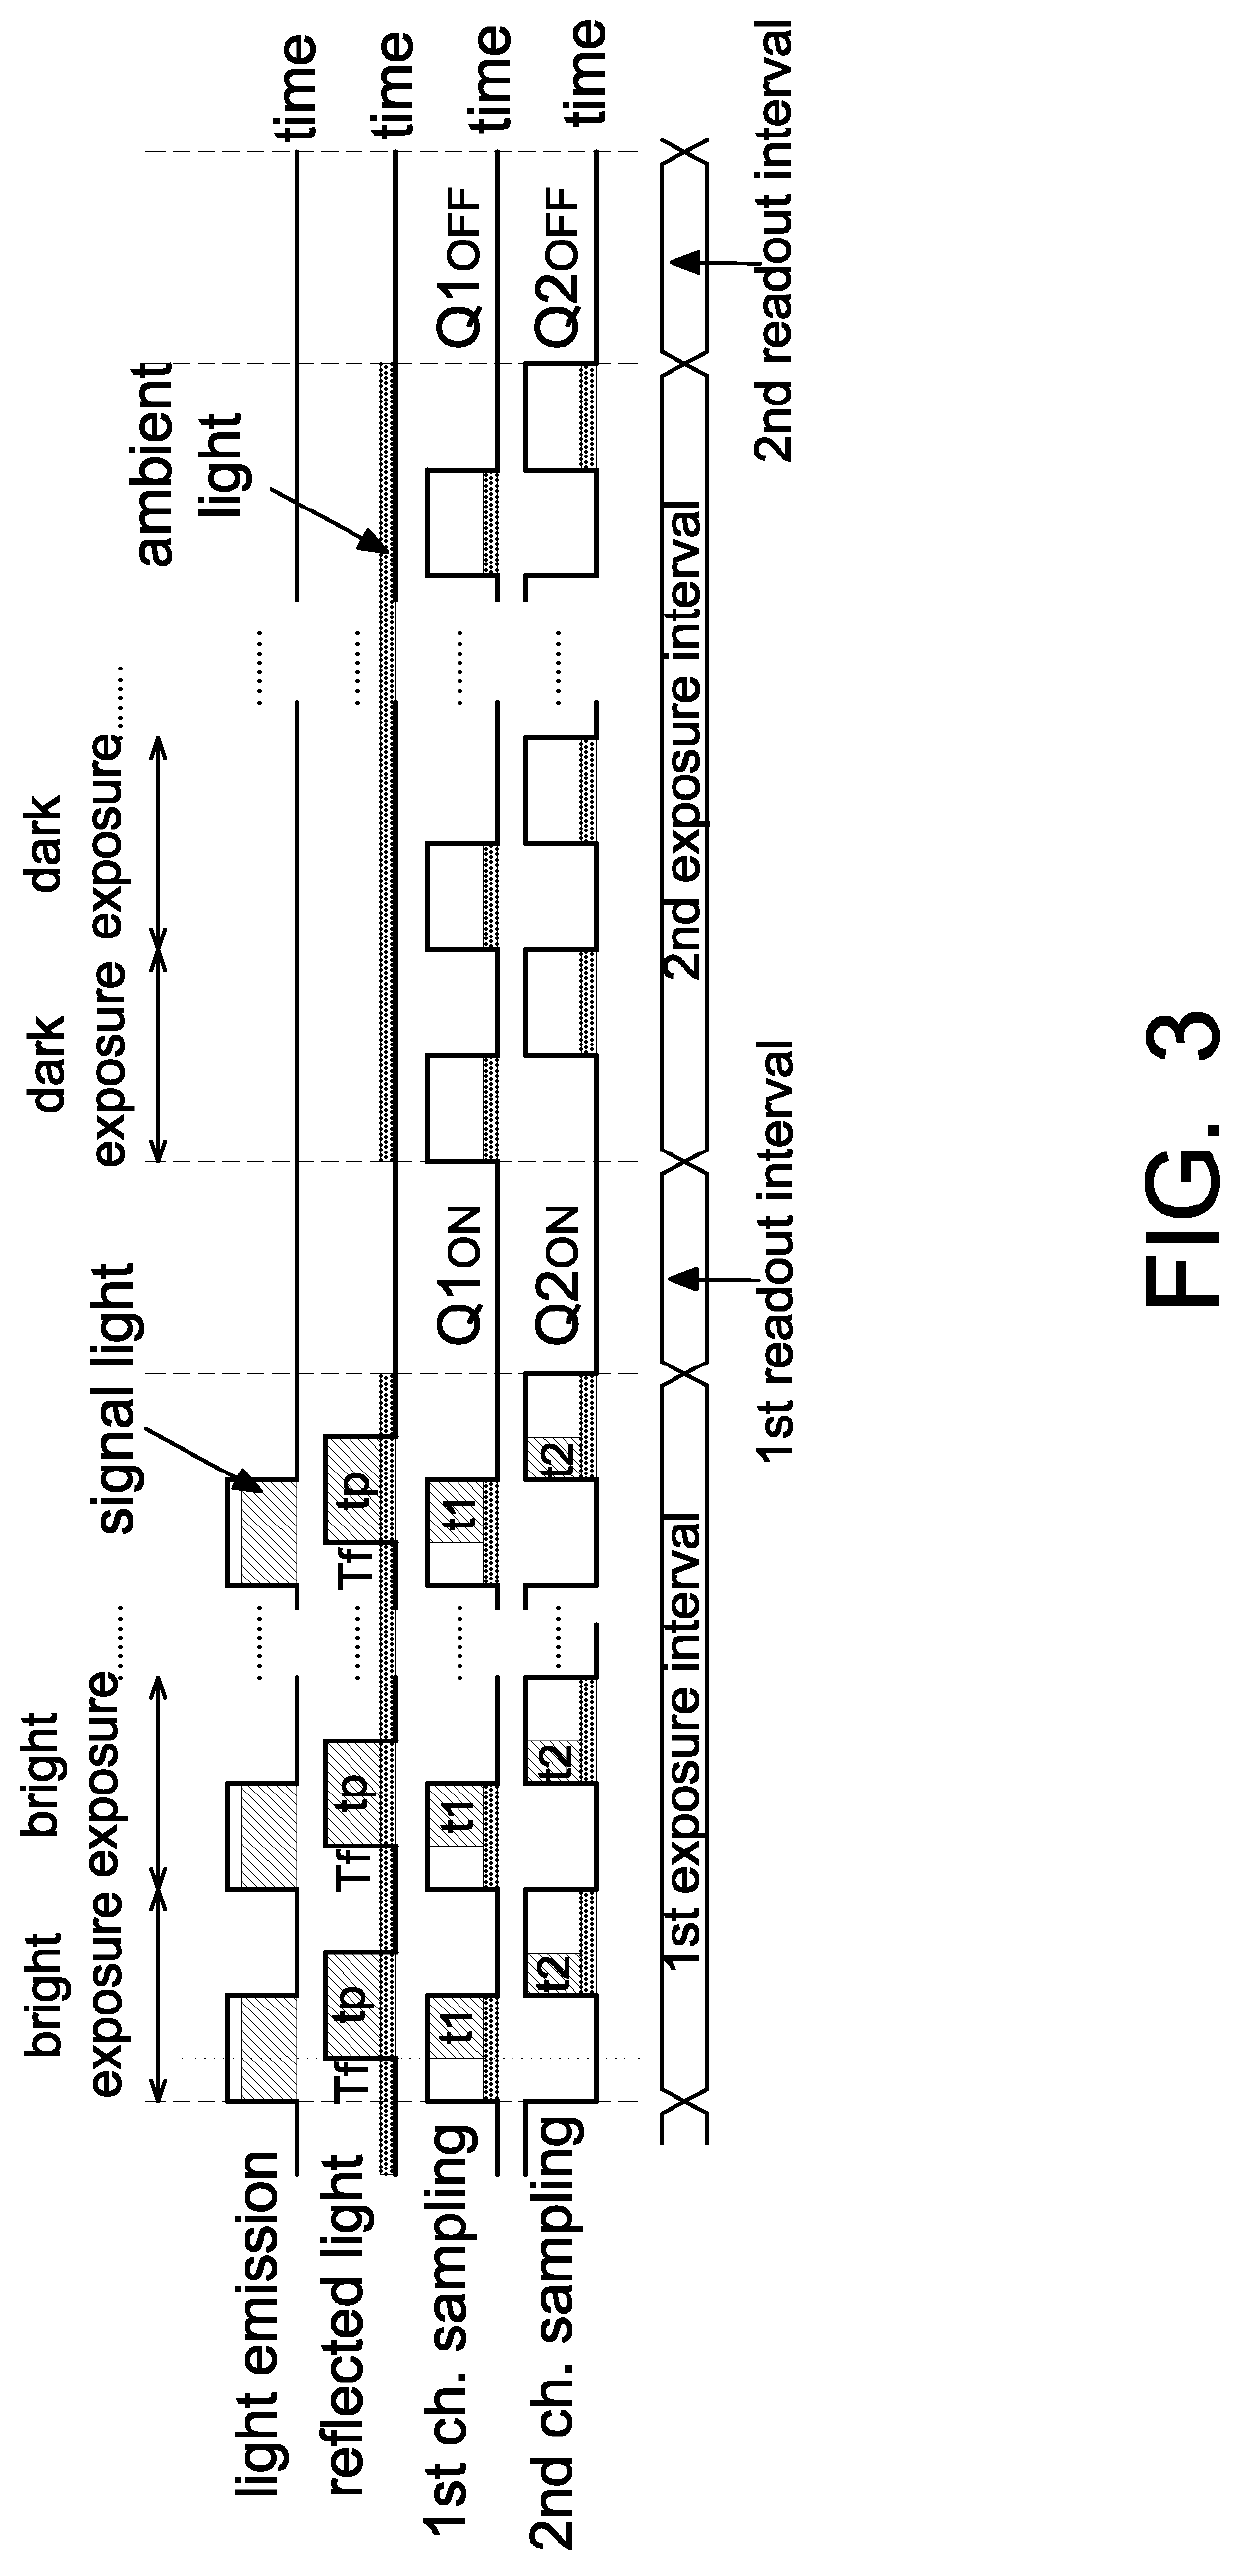 Avalanche diode based object detection device